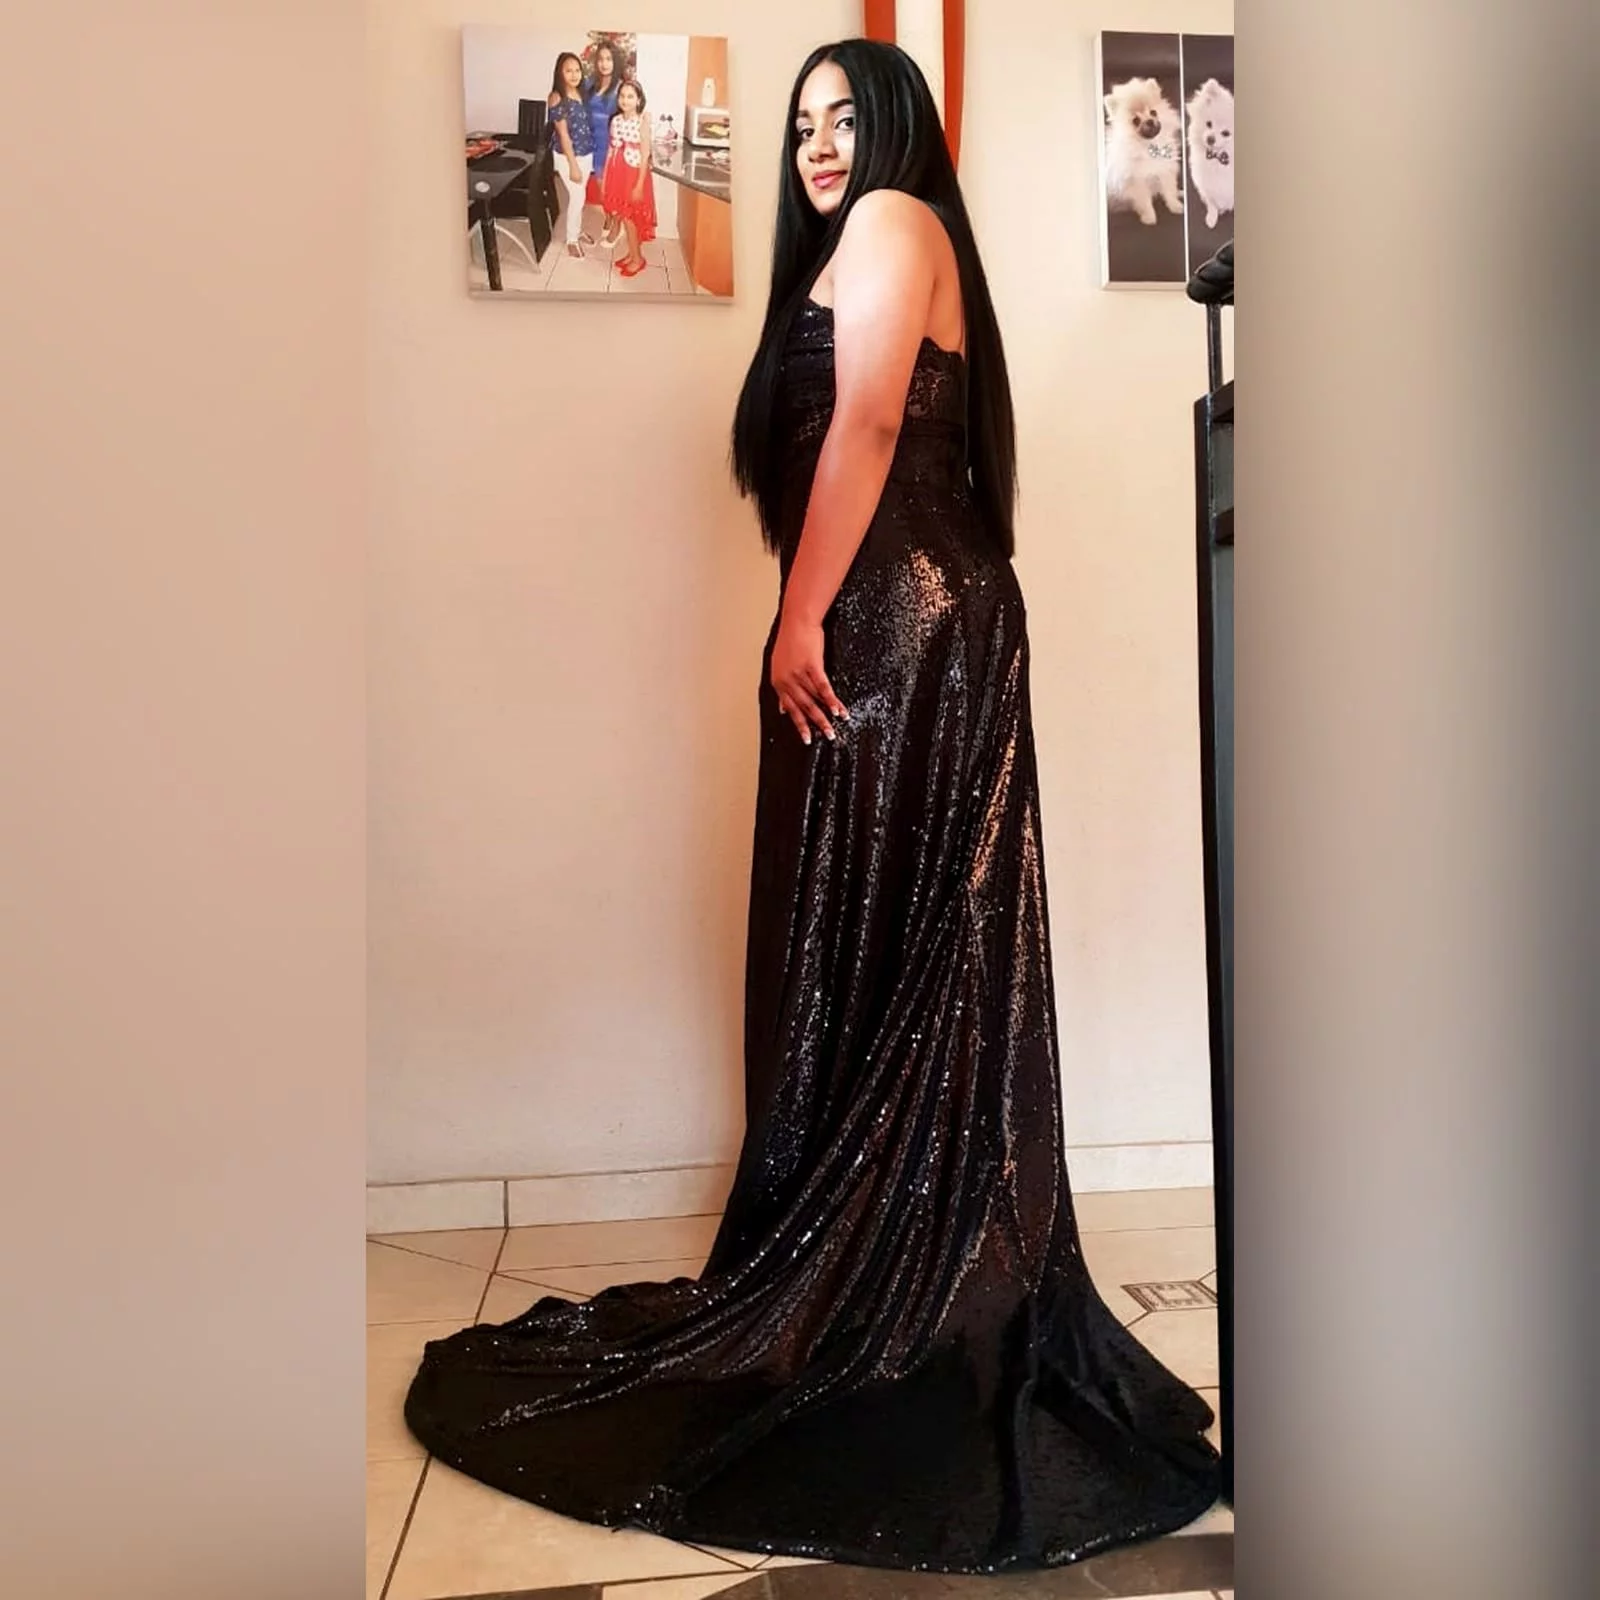 Long black sequins boob tube matric farewell dress 2 long black sequins boob tube matric farewell dress with a sheer lace back and side tummy. High slit and a train.